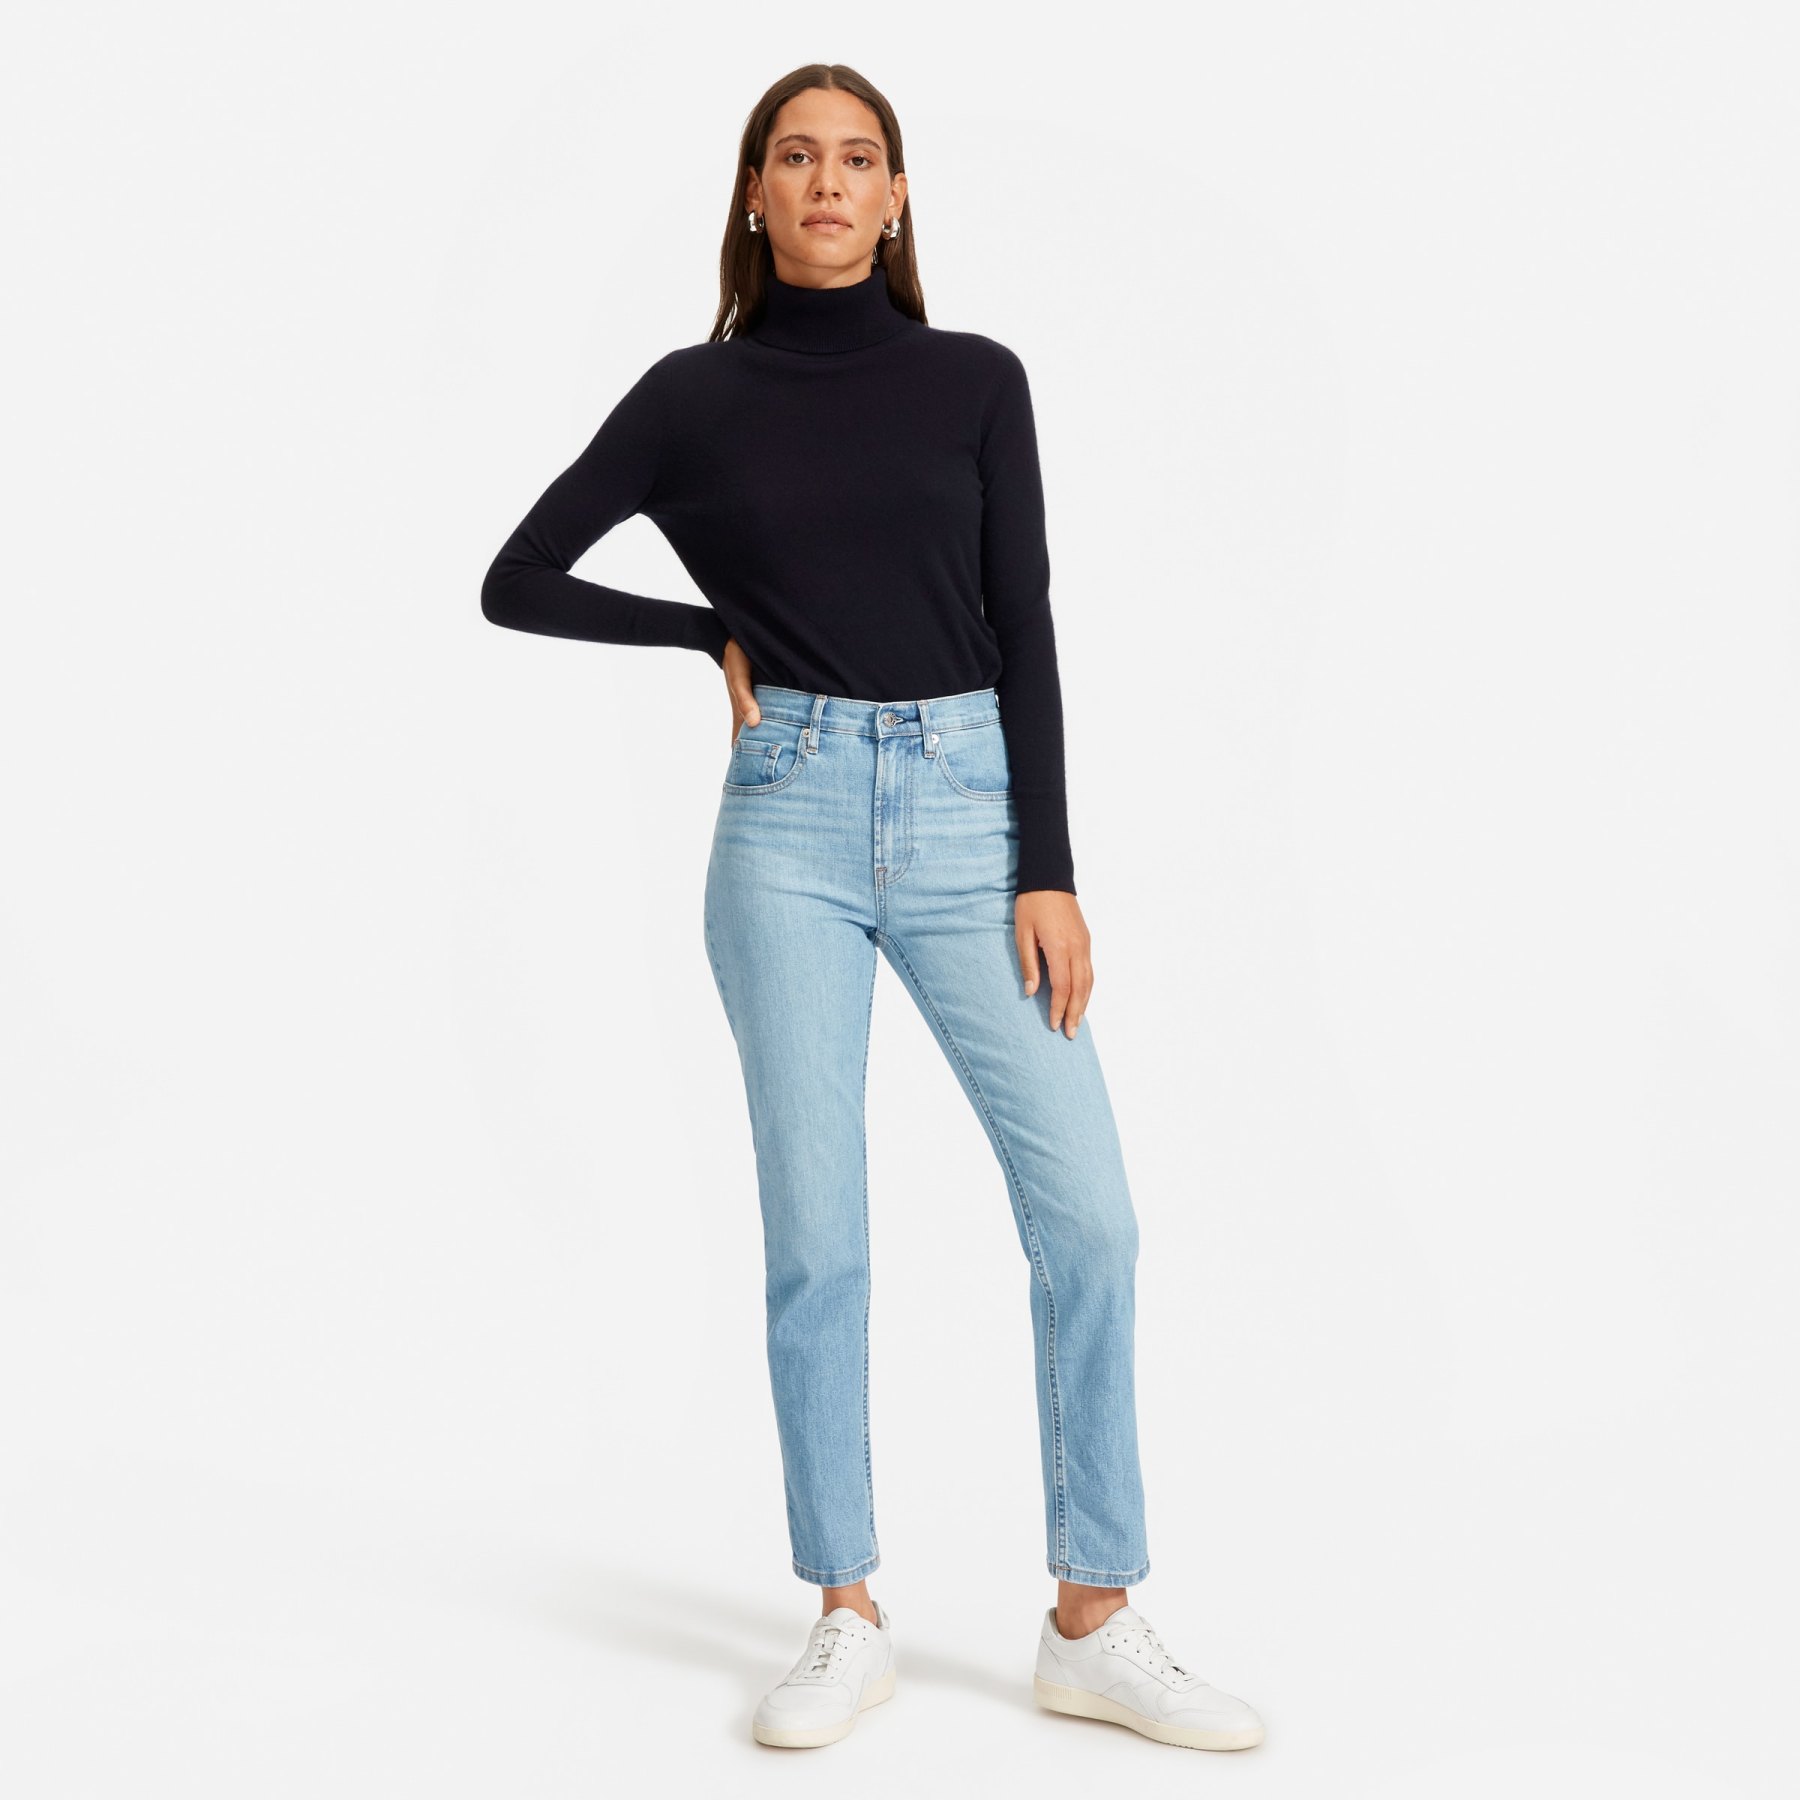 Everlane Bestselling Jeans Are Just $50 — This Week Only! | UsWeekly